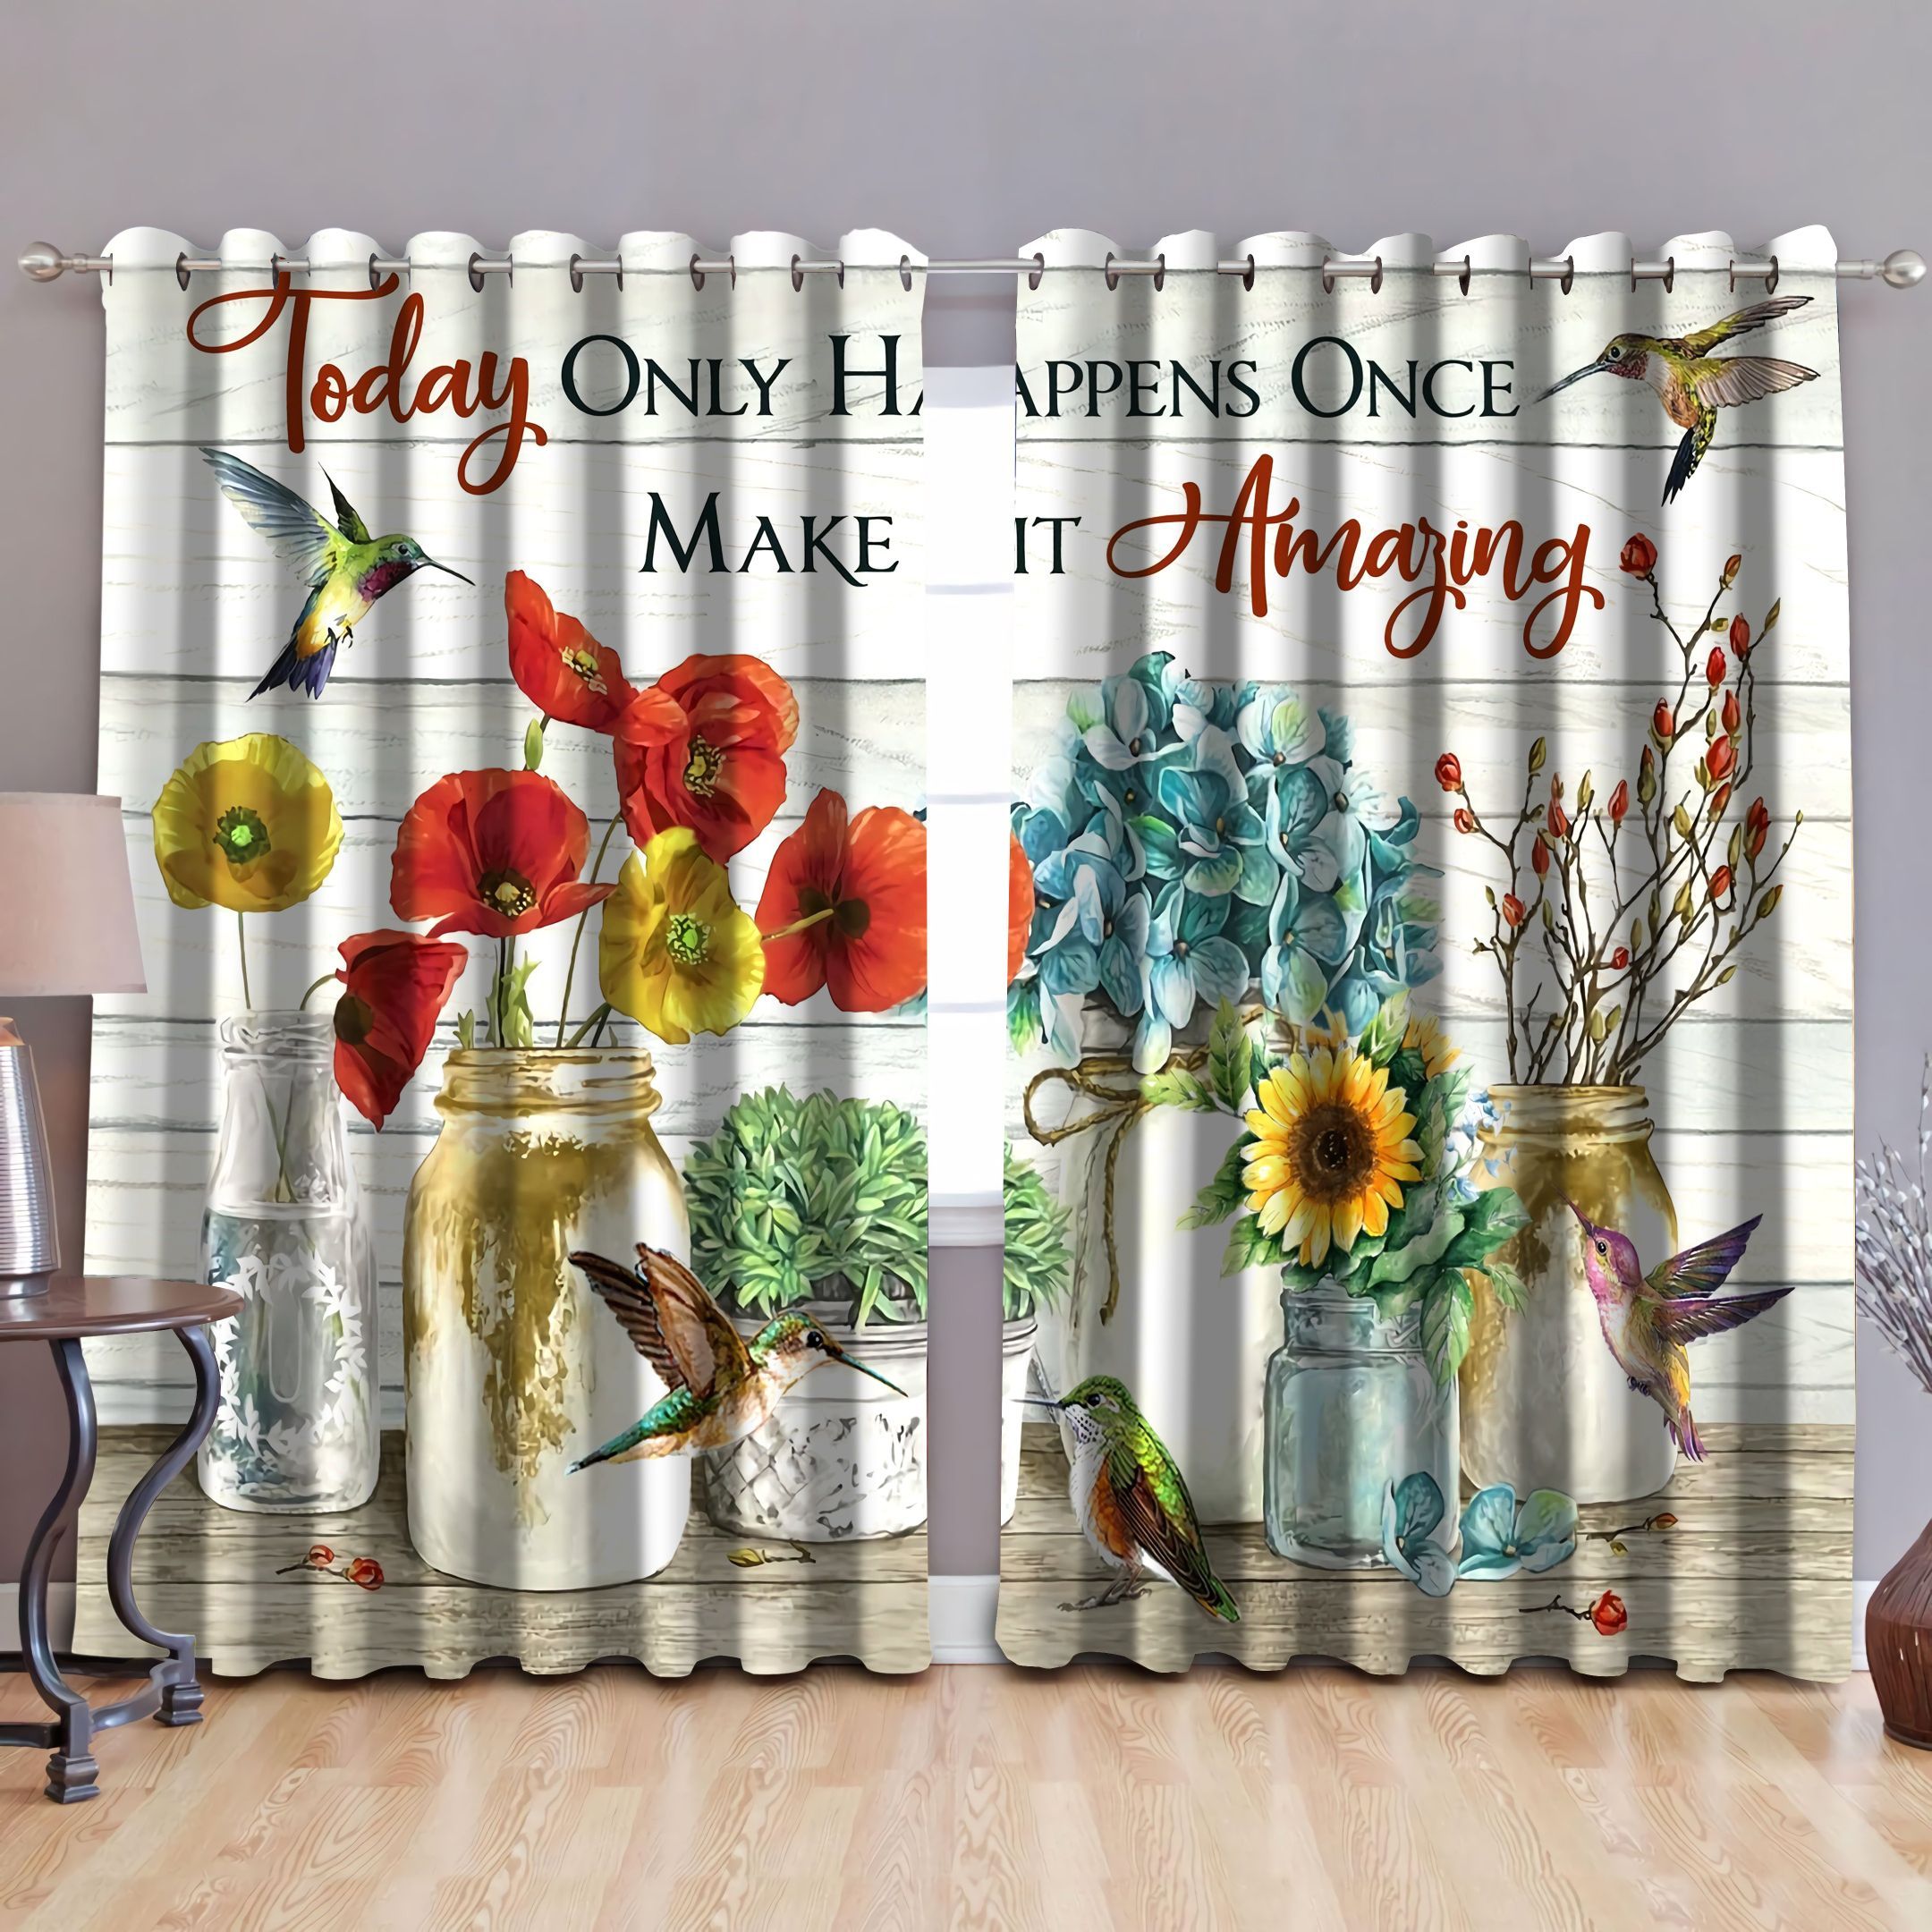 Today Only Happens Once Make It Amazing Hummingbird Printed Window Curtain